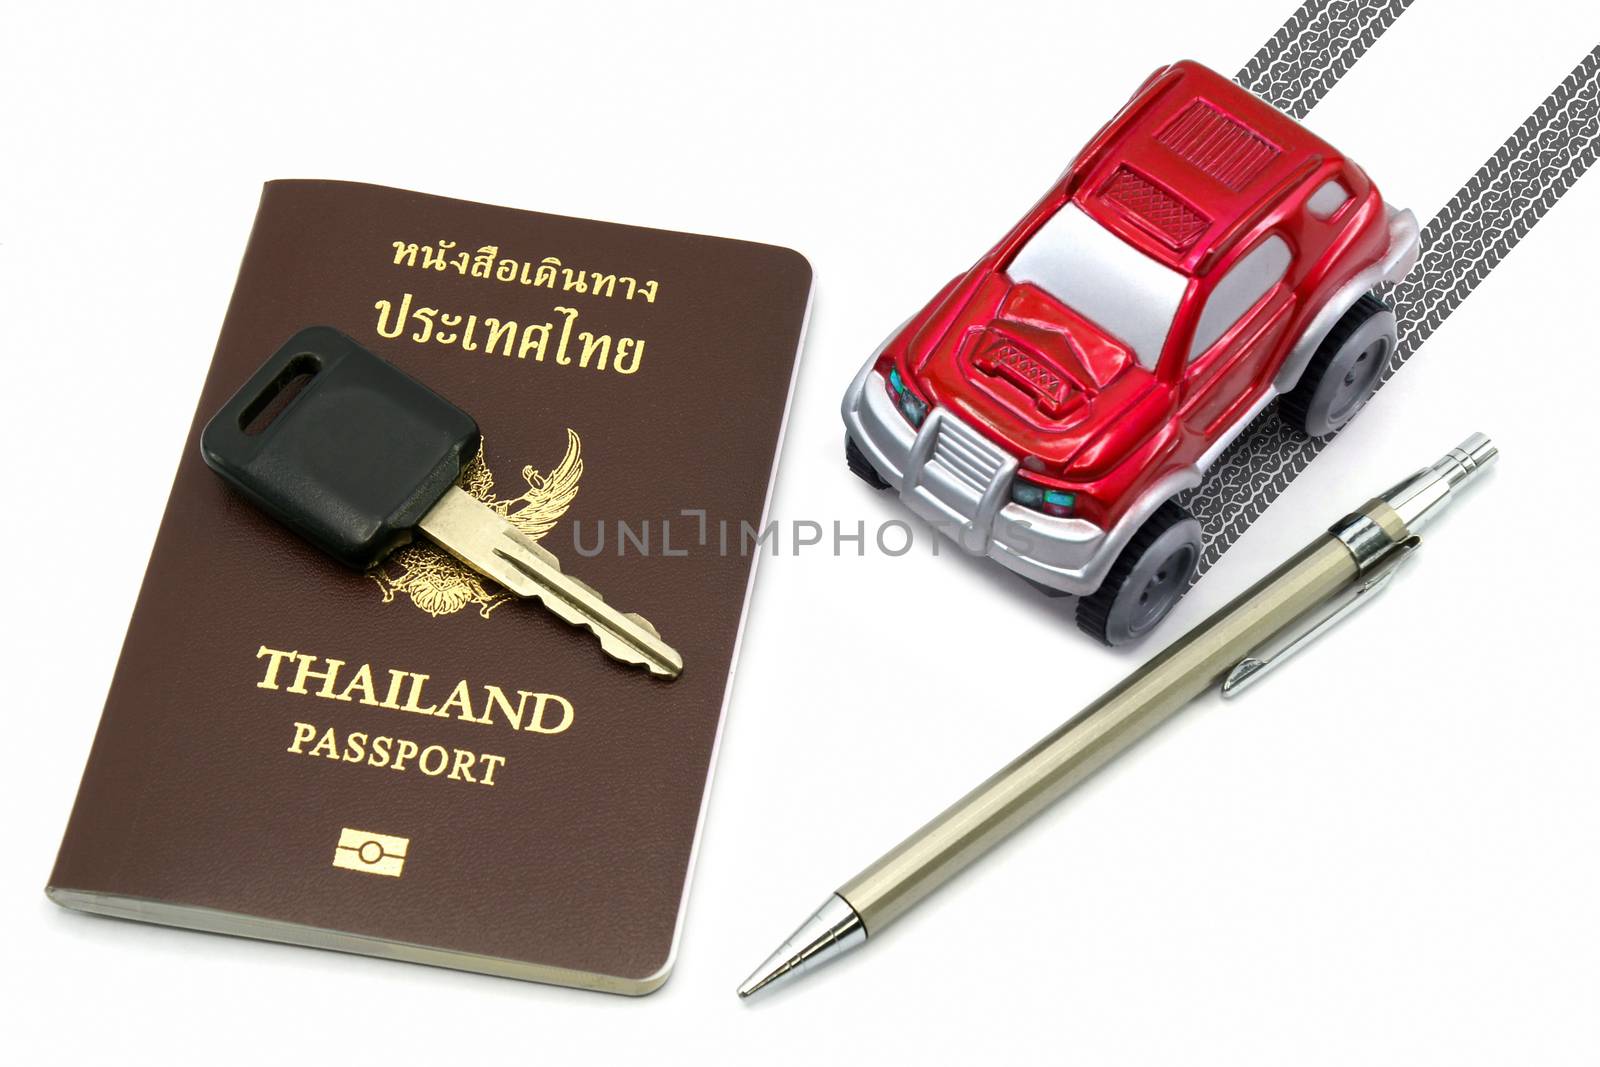 Thailand passport, key, pen and red 4wd car for travel concept.